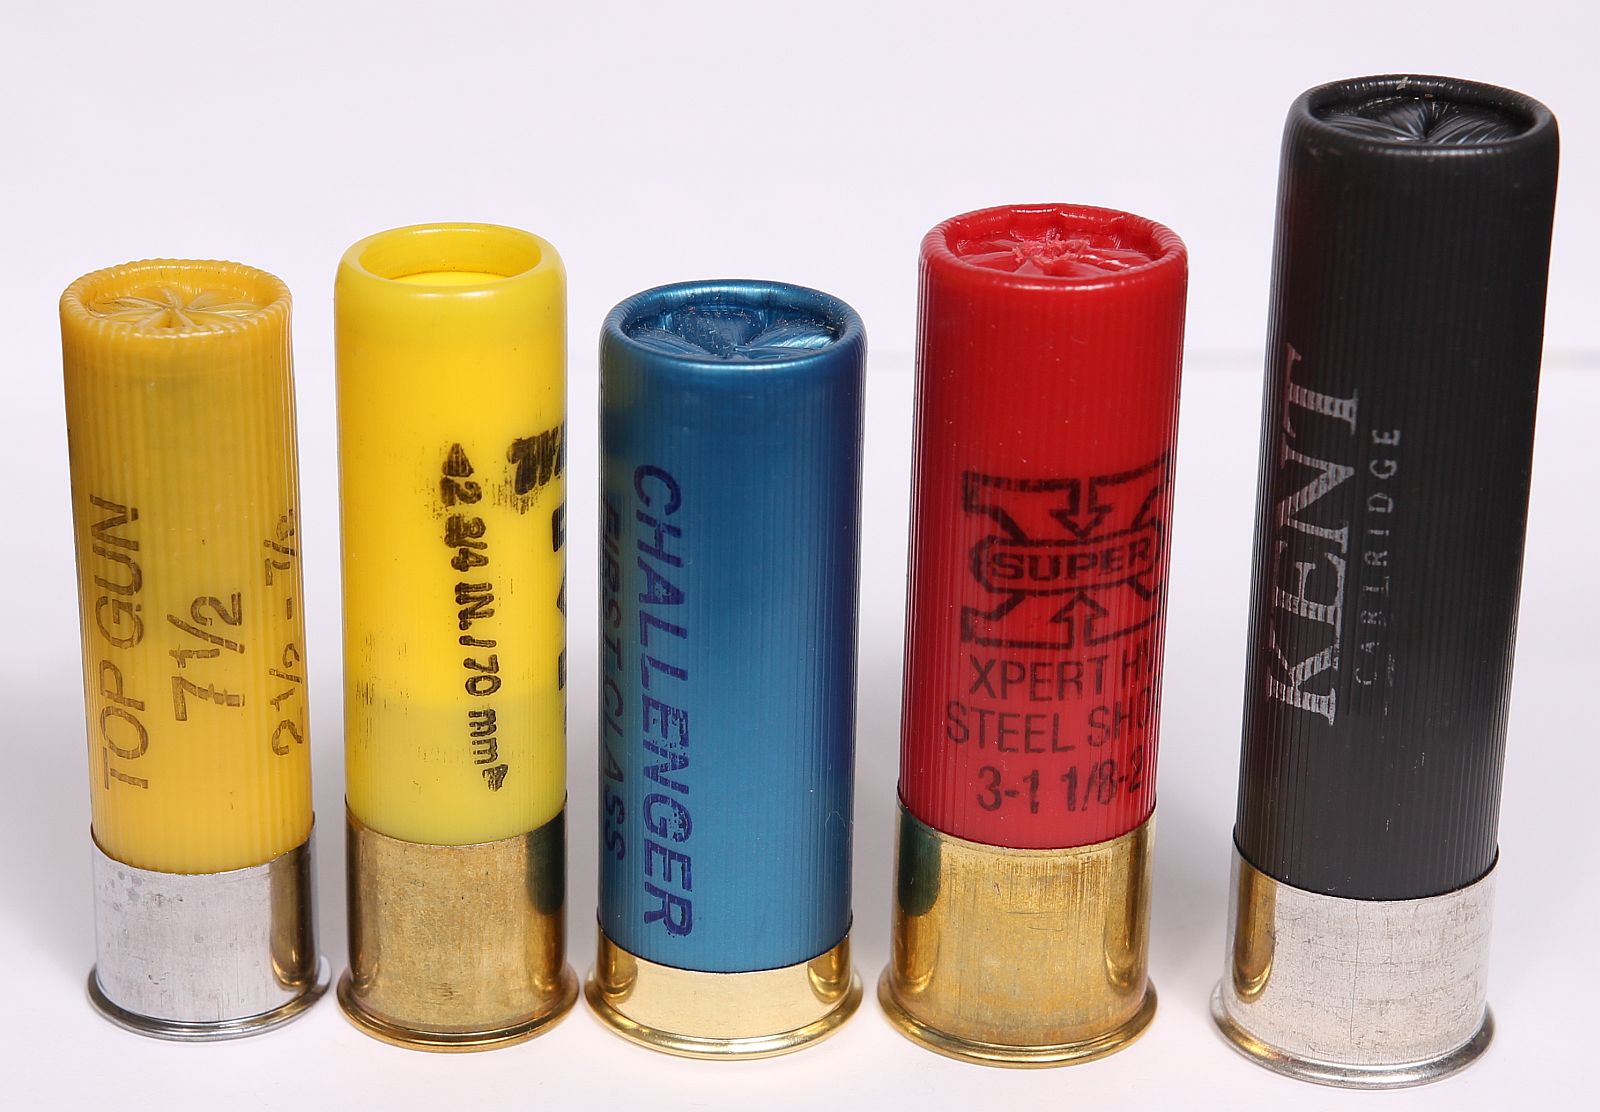 12 gauge is such a popular shotgun shell that most of the time